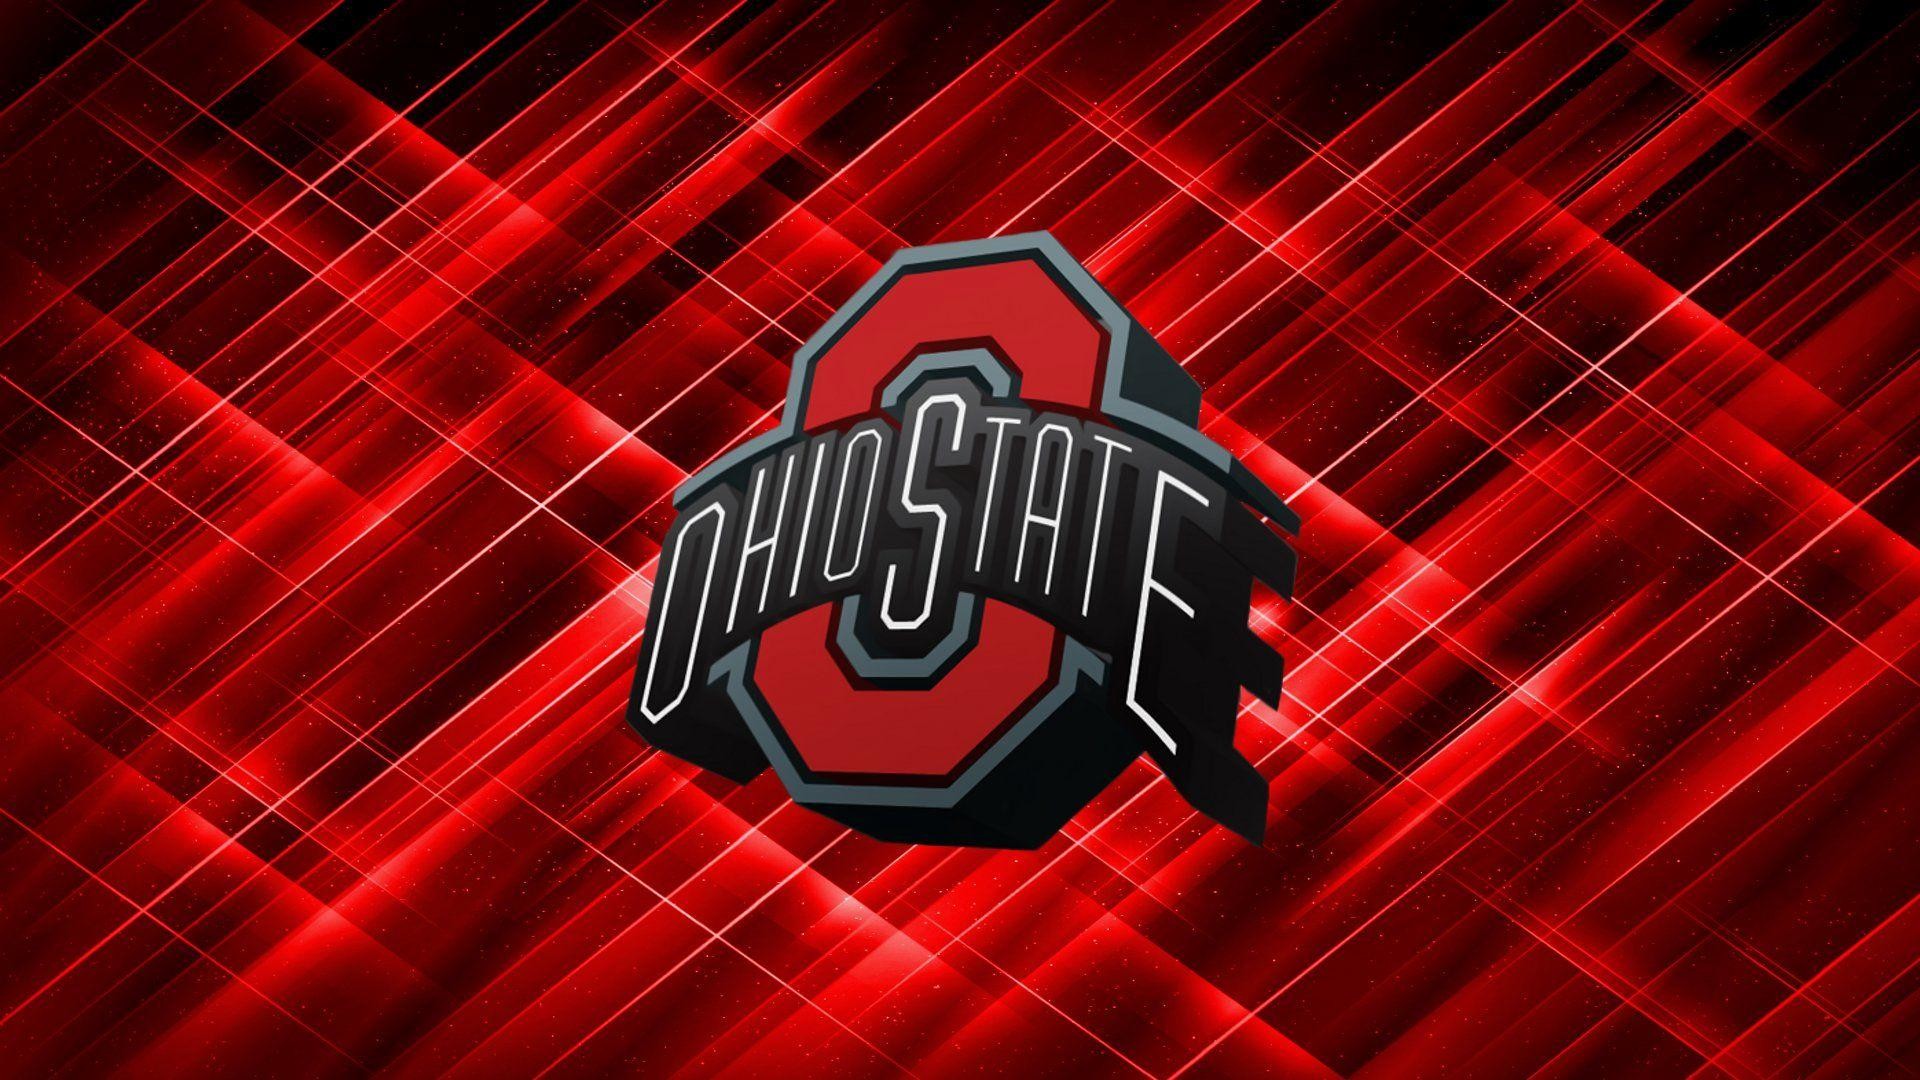 1920x1080 Ohio-State-Buckeyes-Football-Backgrounds-Download-wallpaper-wp2008627